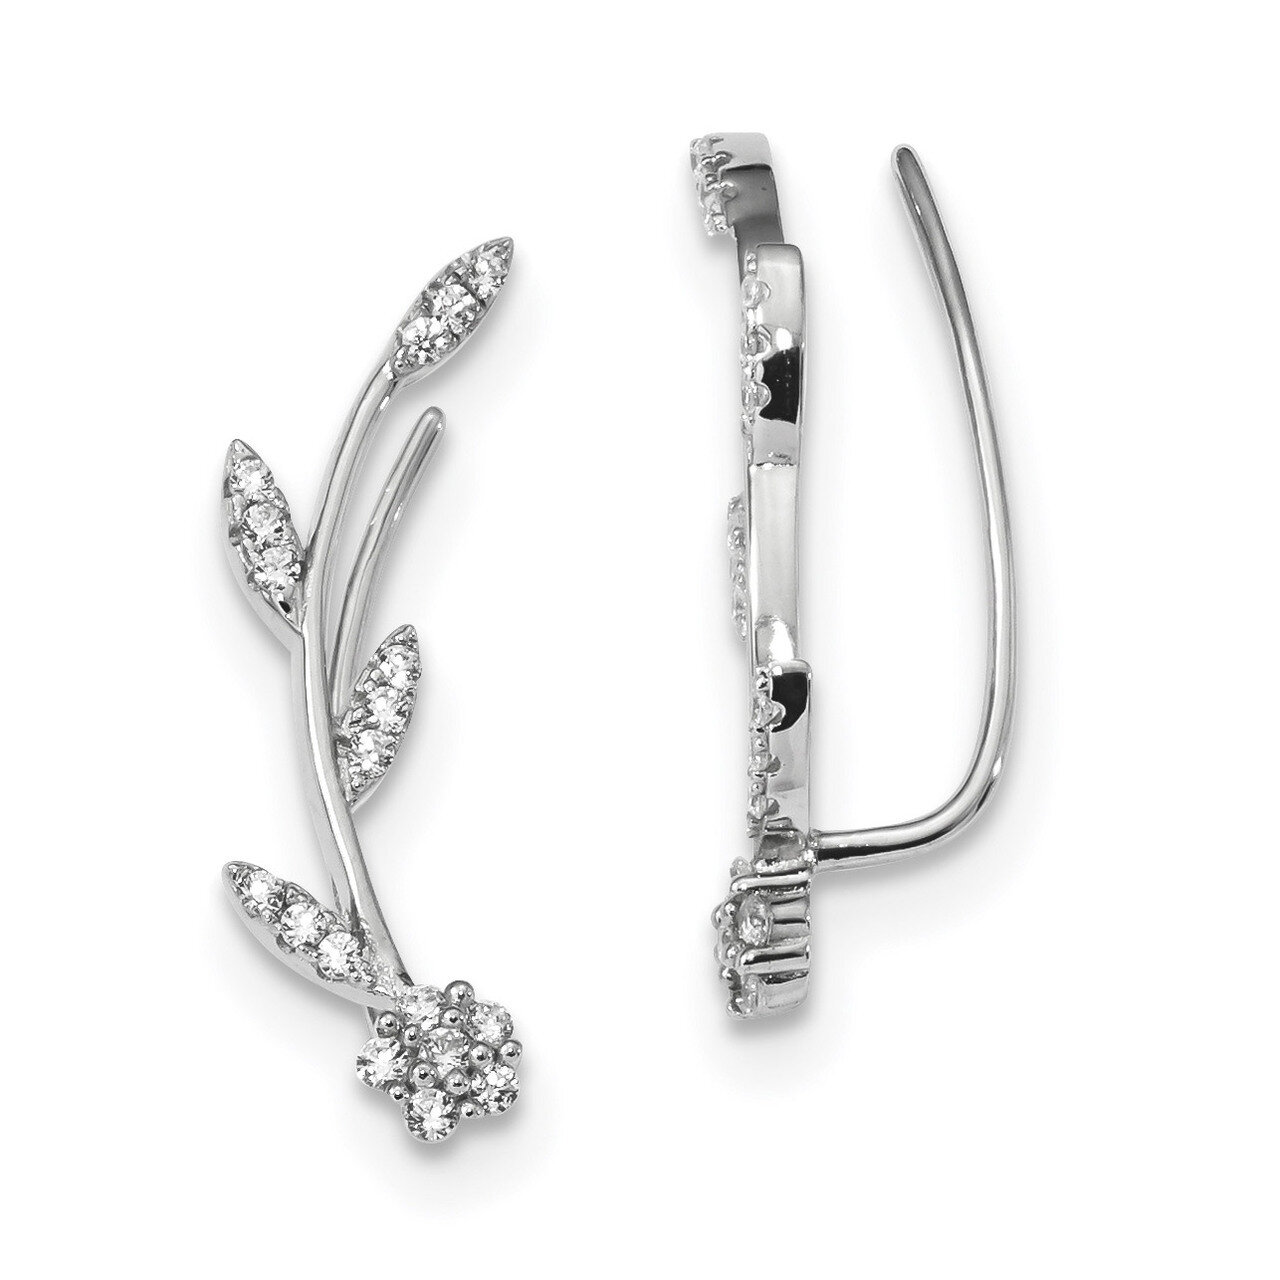 CZ Diamond Flower with Stem Ear Climber Earrings Sterling Silver Rhodium-plated QE13481